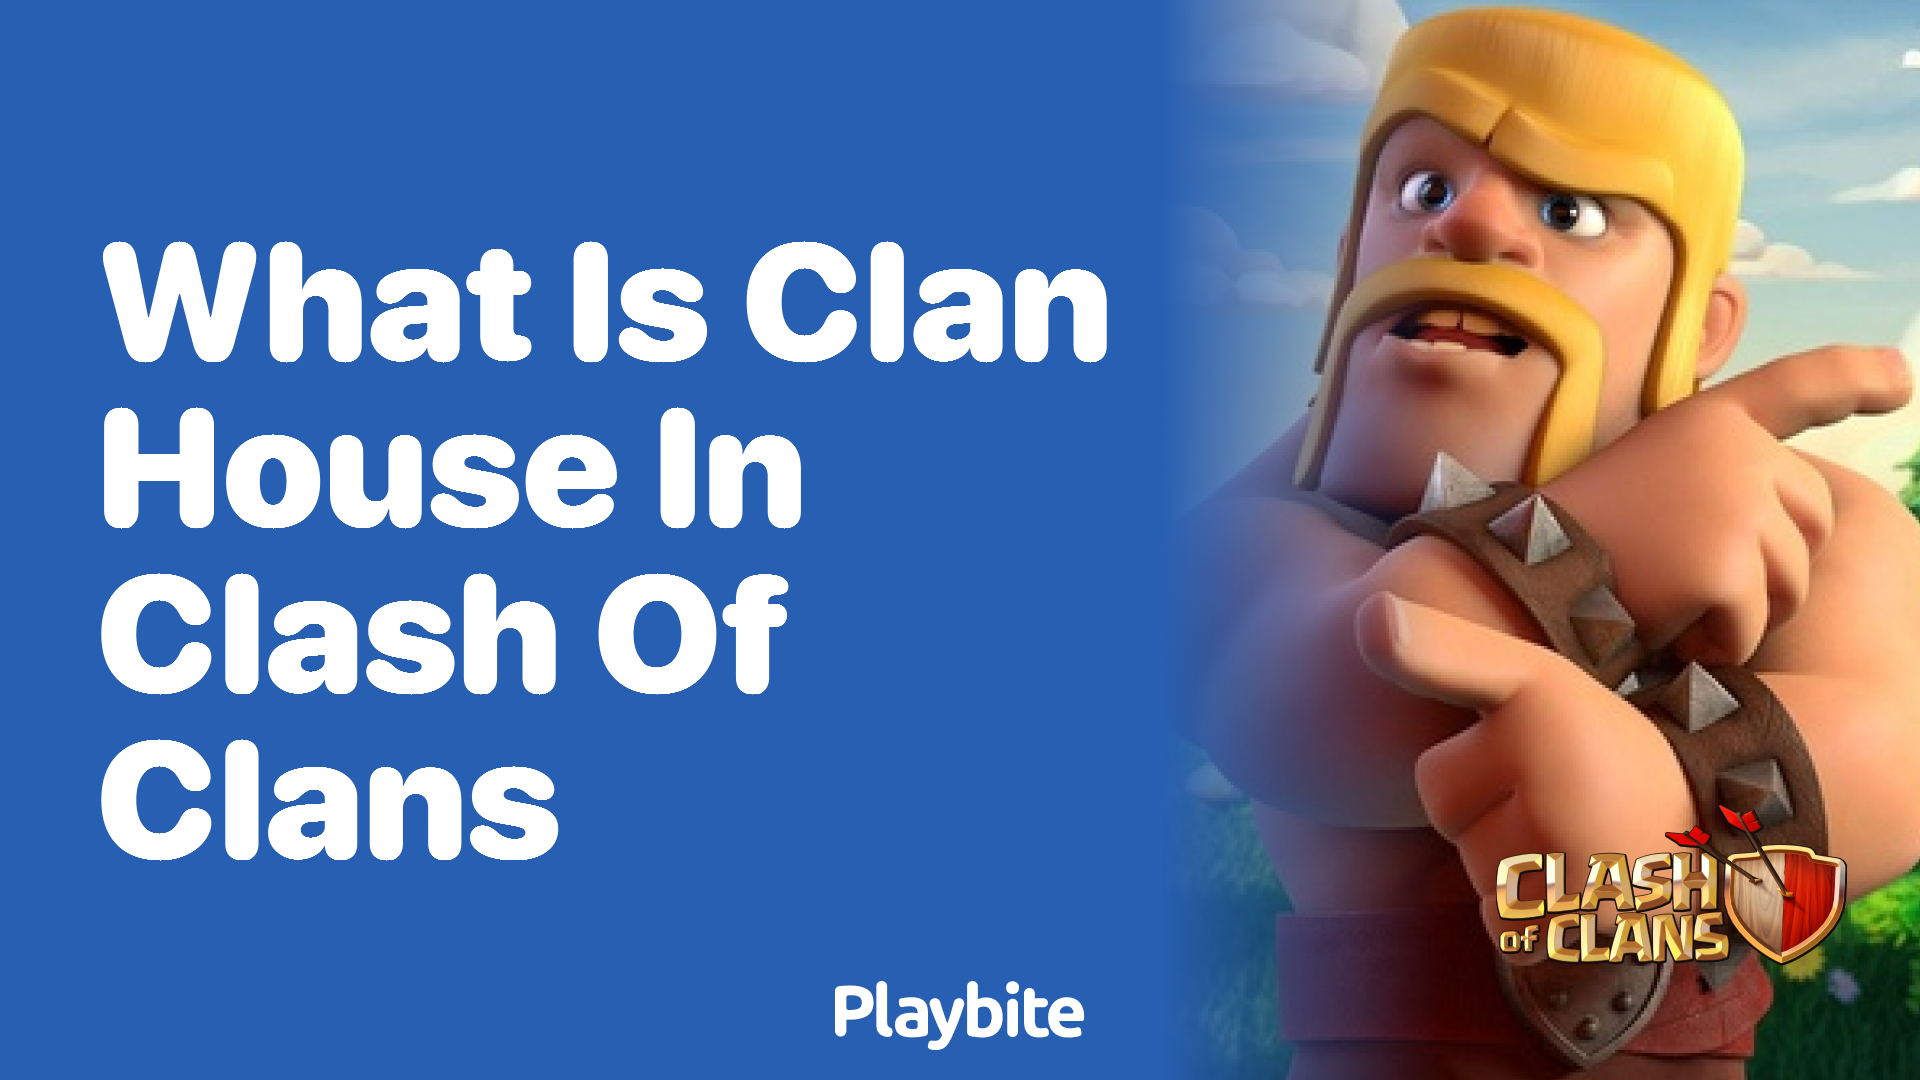 What is a Clan House in Clash of Clans?